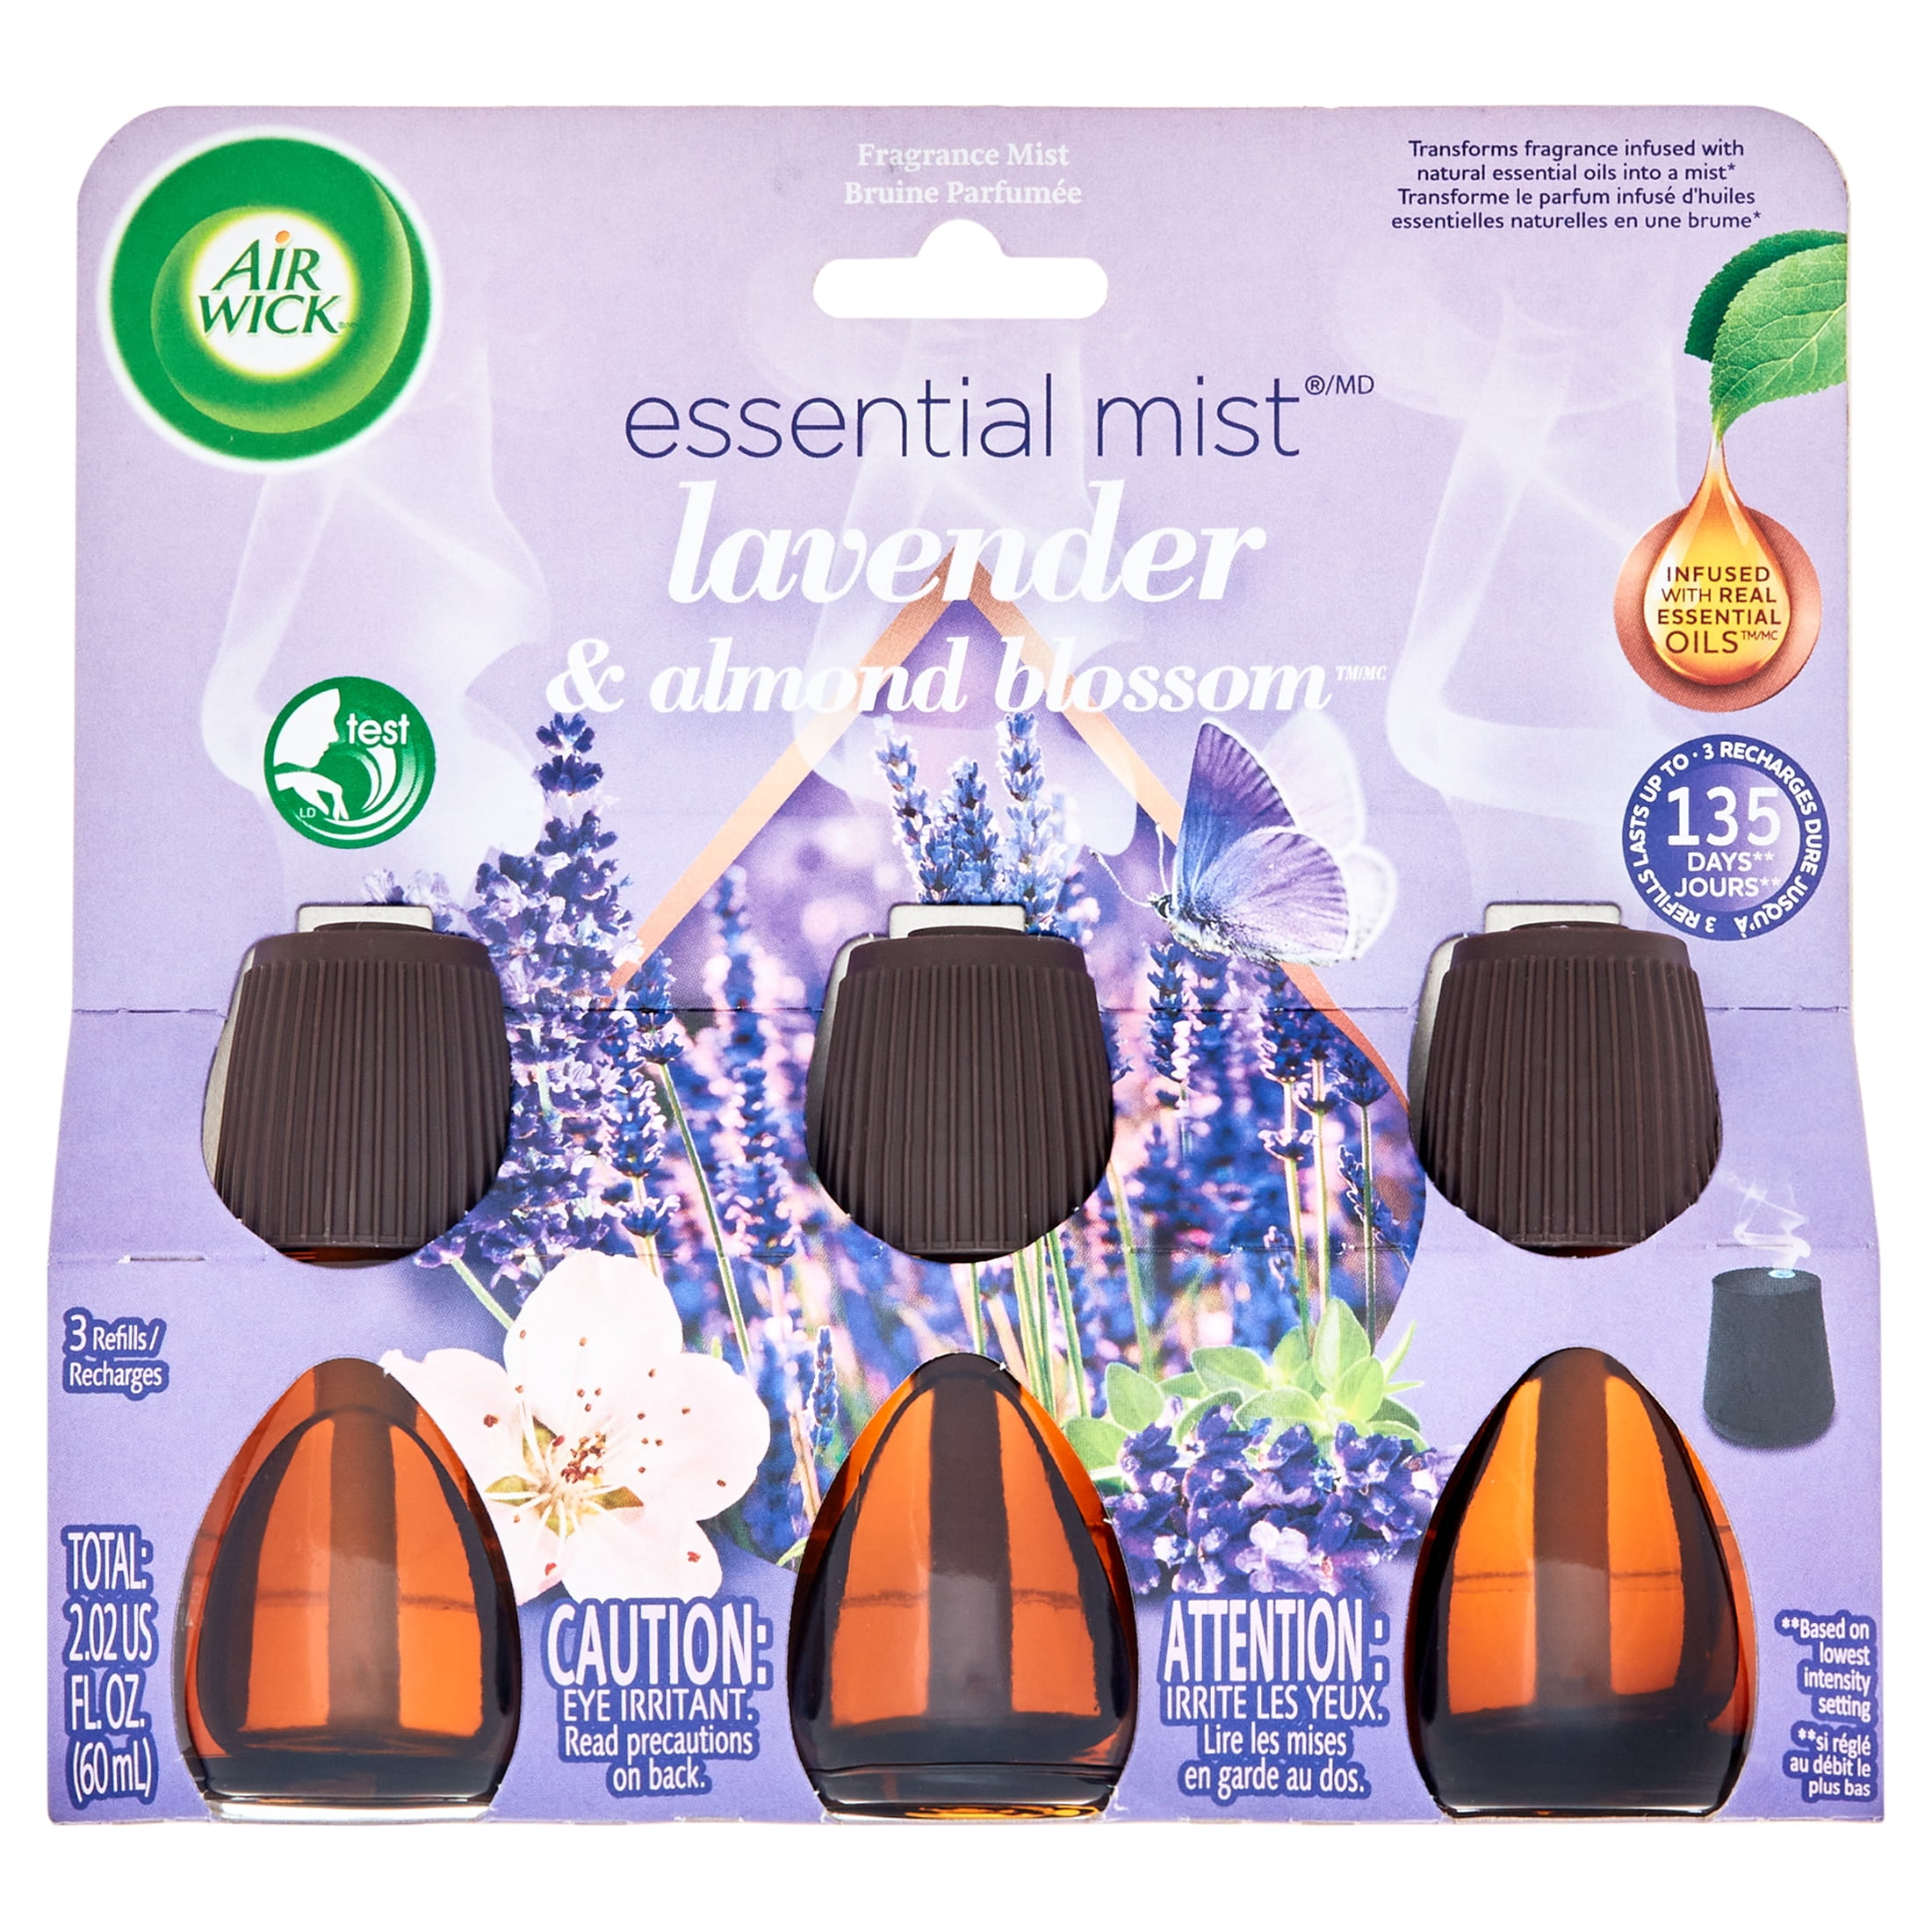 Air Wick Essential Mist Refill, 3 ct, Lavender and Almond Blossom, Essential  Oils Diffuser, Air Freshener 